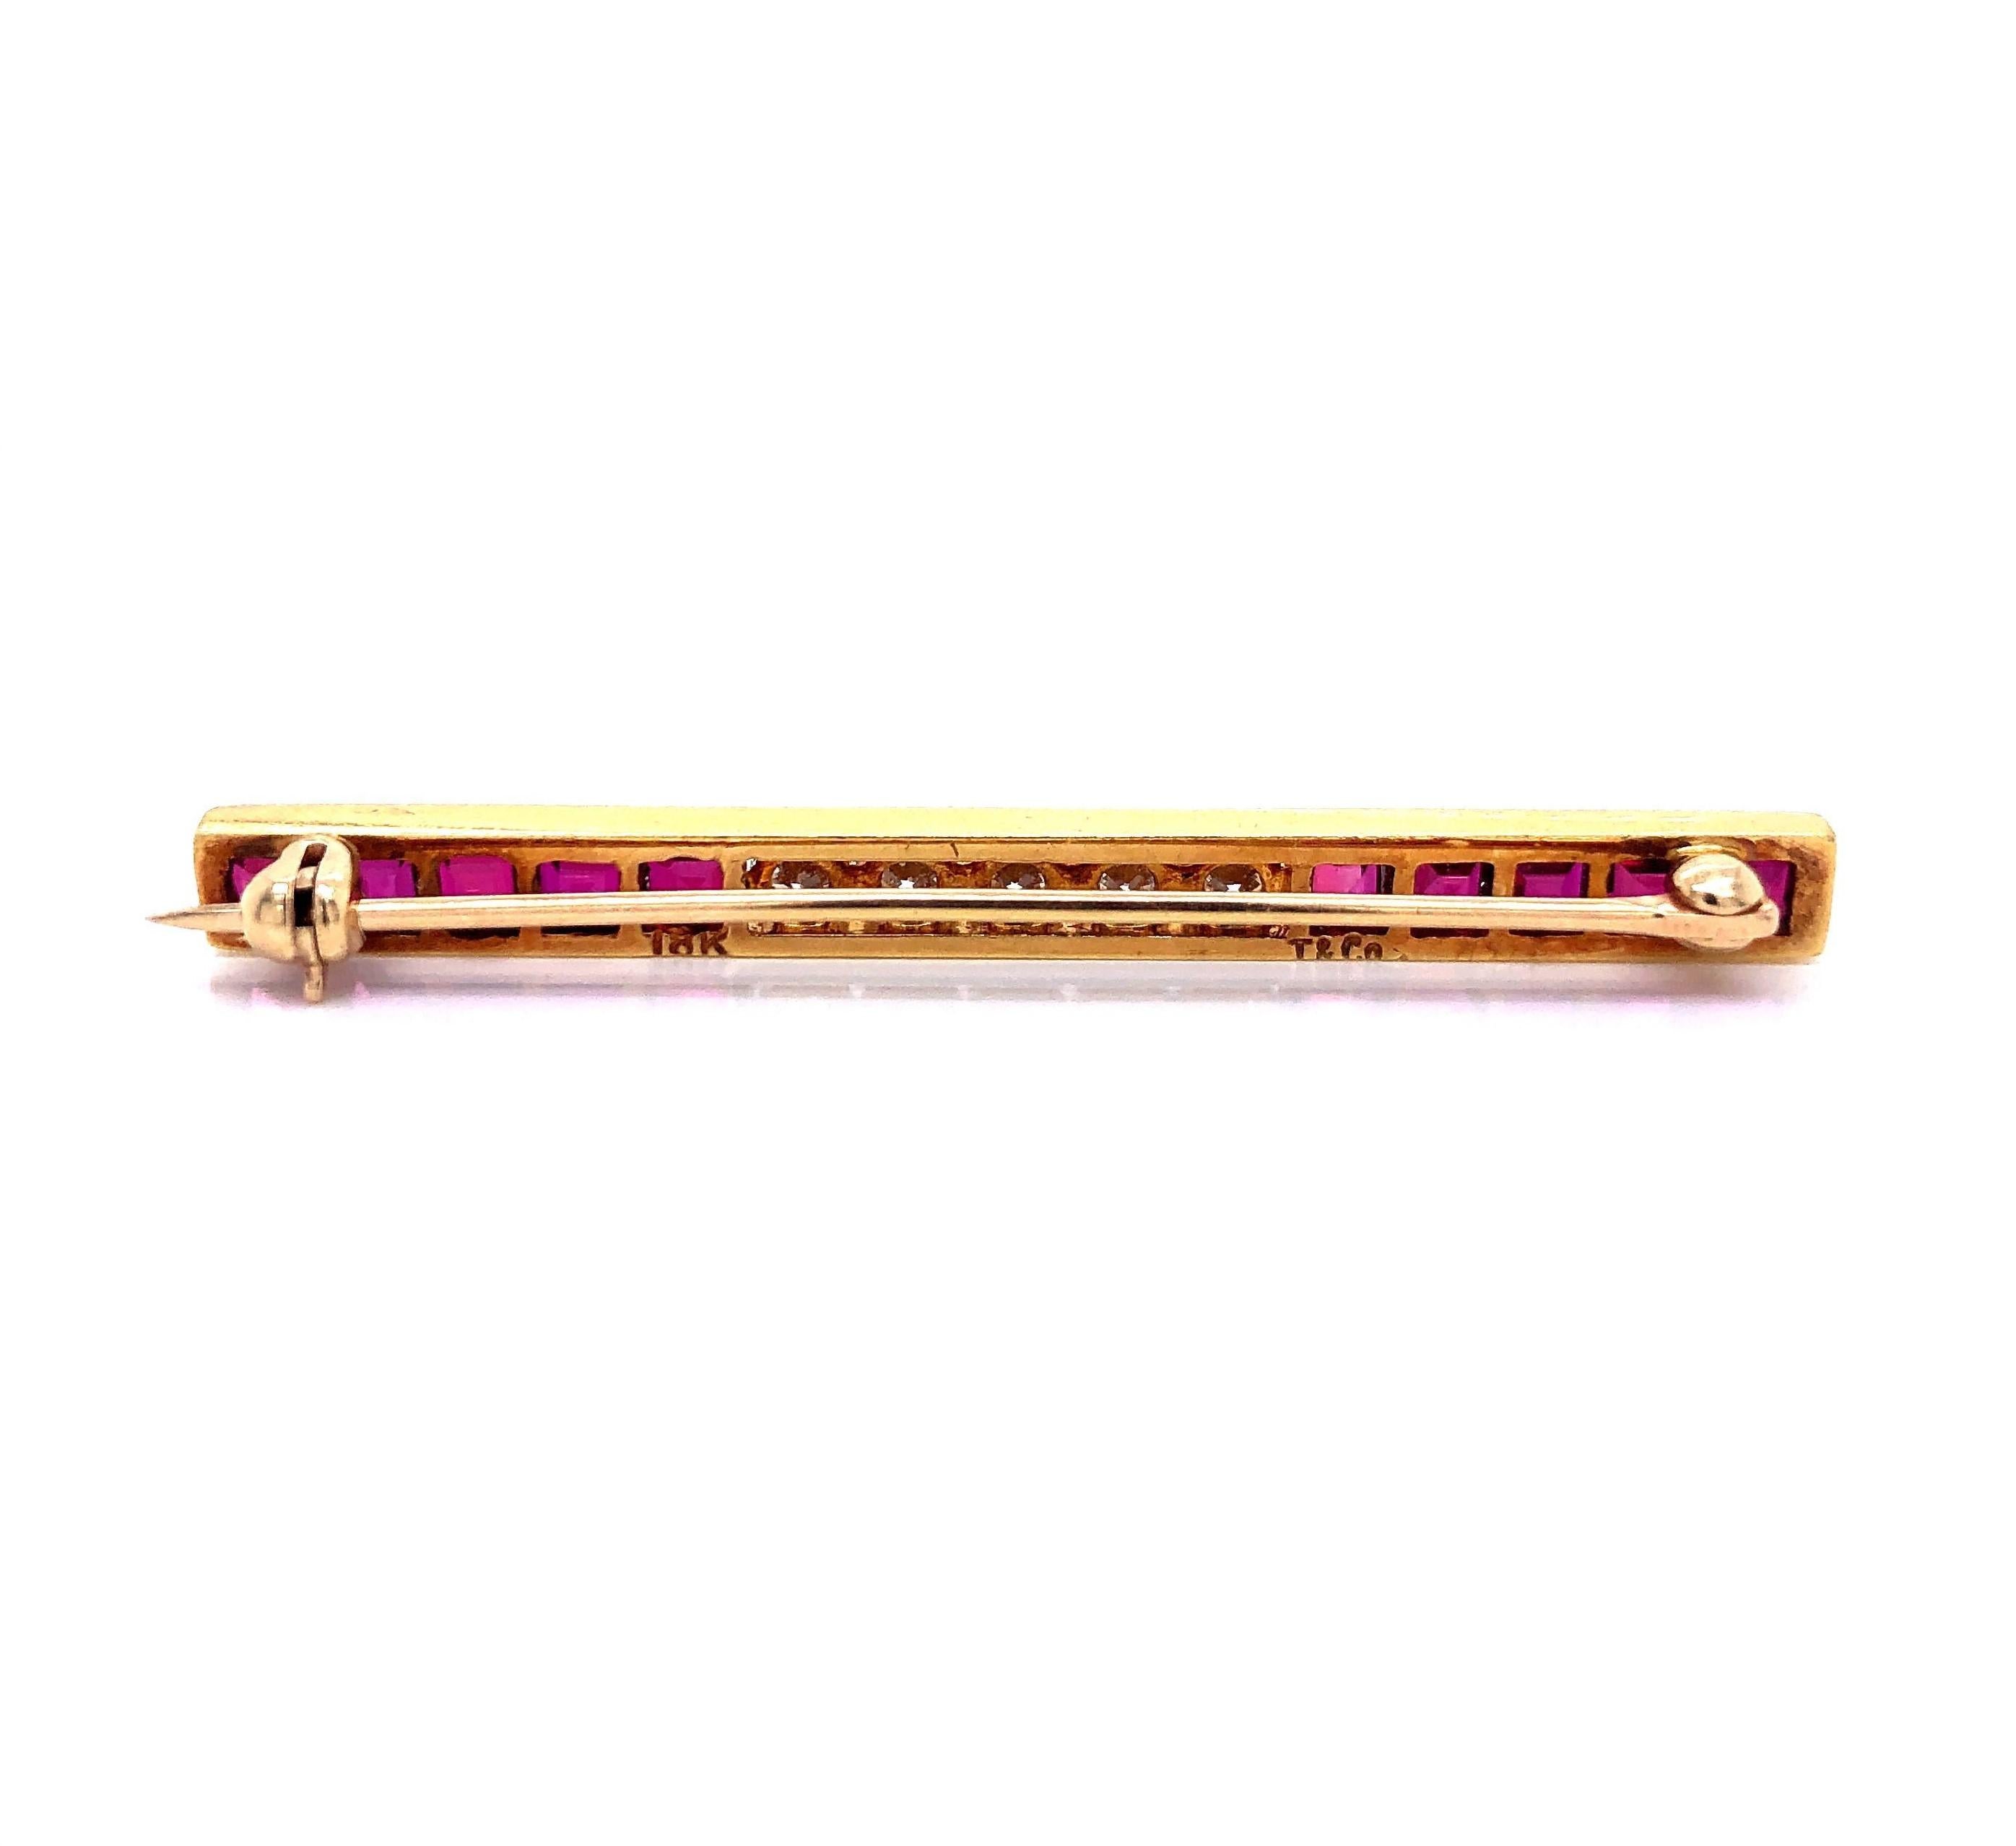 Tiffany & Co. Vintage 18k Yellow Gold Ruby and .50cttw Diamond Bar Brooch

Condition:  Excellent Condition
Metal:  18k Gold (Marked, and Professionally Tested)
Gemstones:  Natural Bright Red Princess Cut Rubies 2cttw
Diamonds:  Round Brilliant